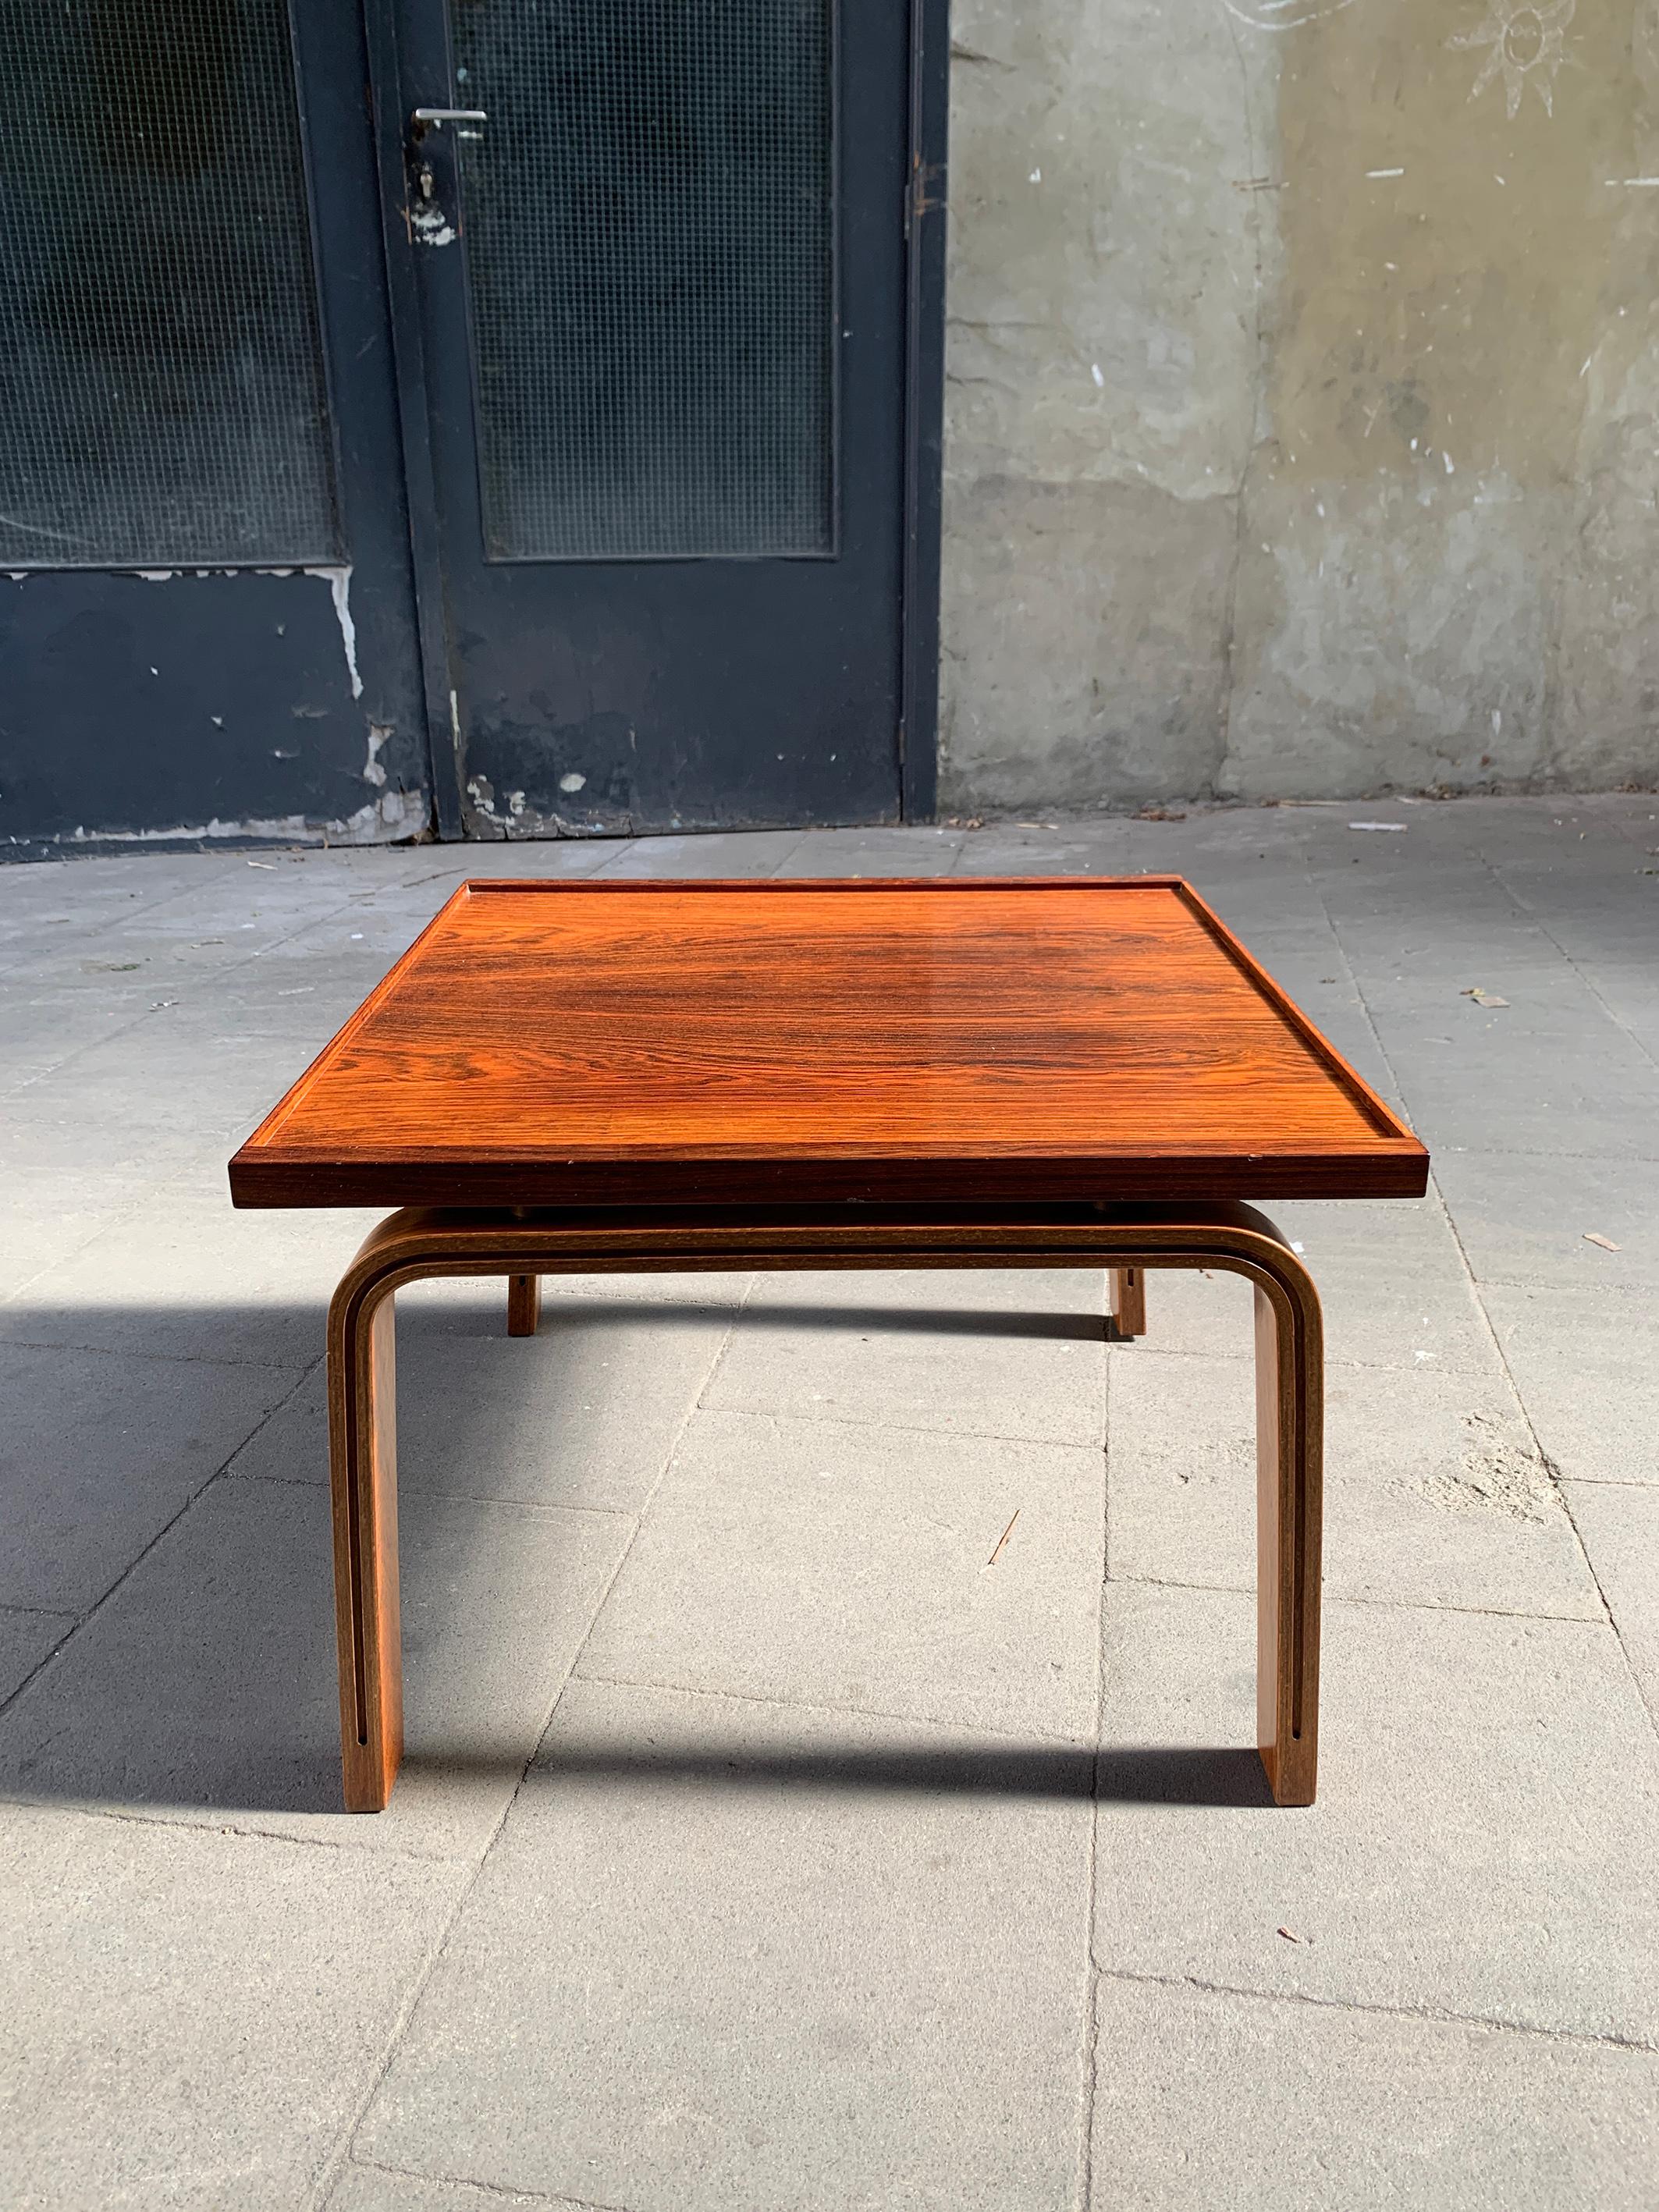 Rare danish side- or coffee-table in Rosewood designed by Arne Jacobsen. Very nice original state.

Arne Jacobsen created the extension of the St. Catherines College of Oxford in 1959 to 1964. Beside the well known Oxford series chairs, he designed